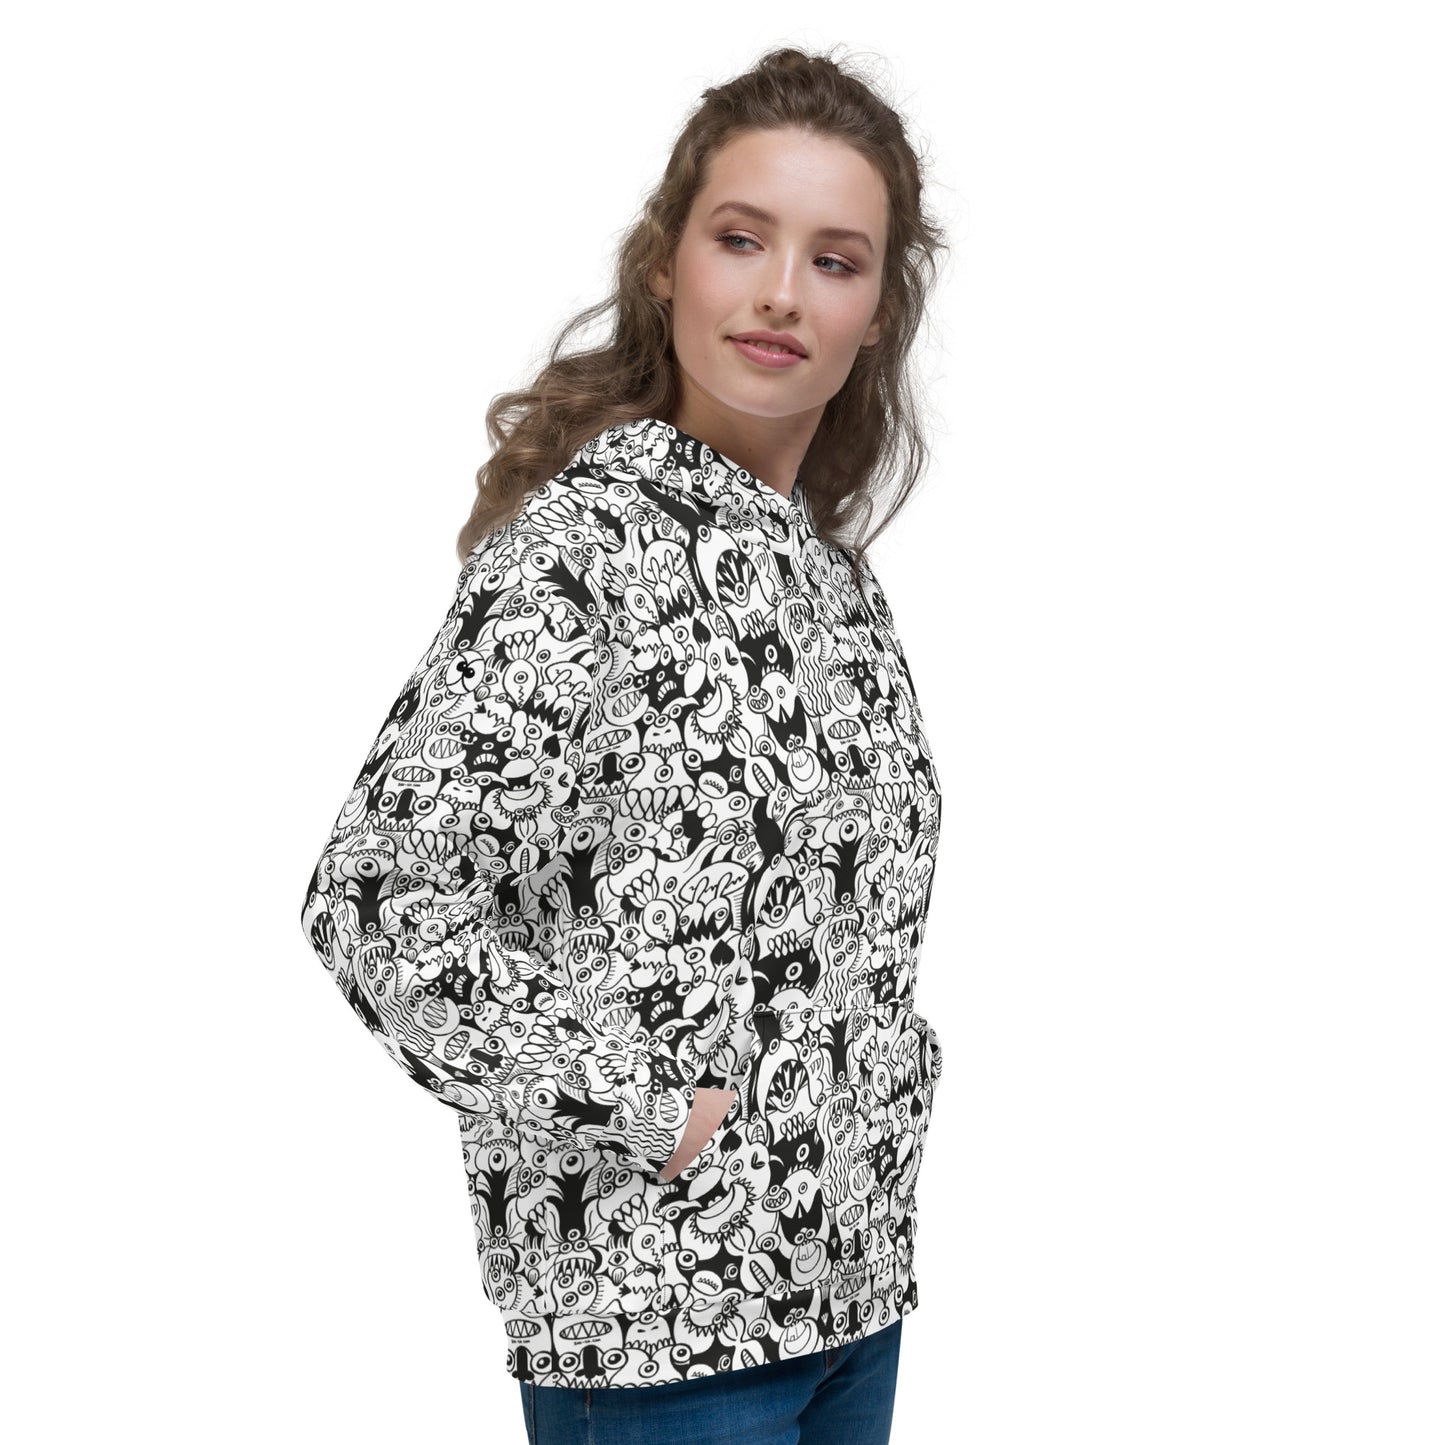 Beautiful woman wearing Unisex Hoodie All over printed with Black and white cool doodles art